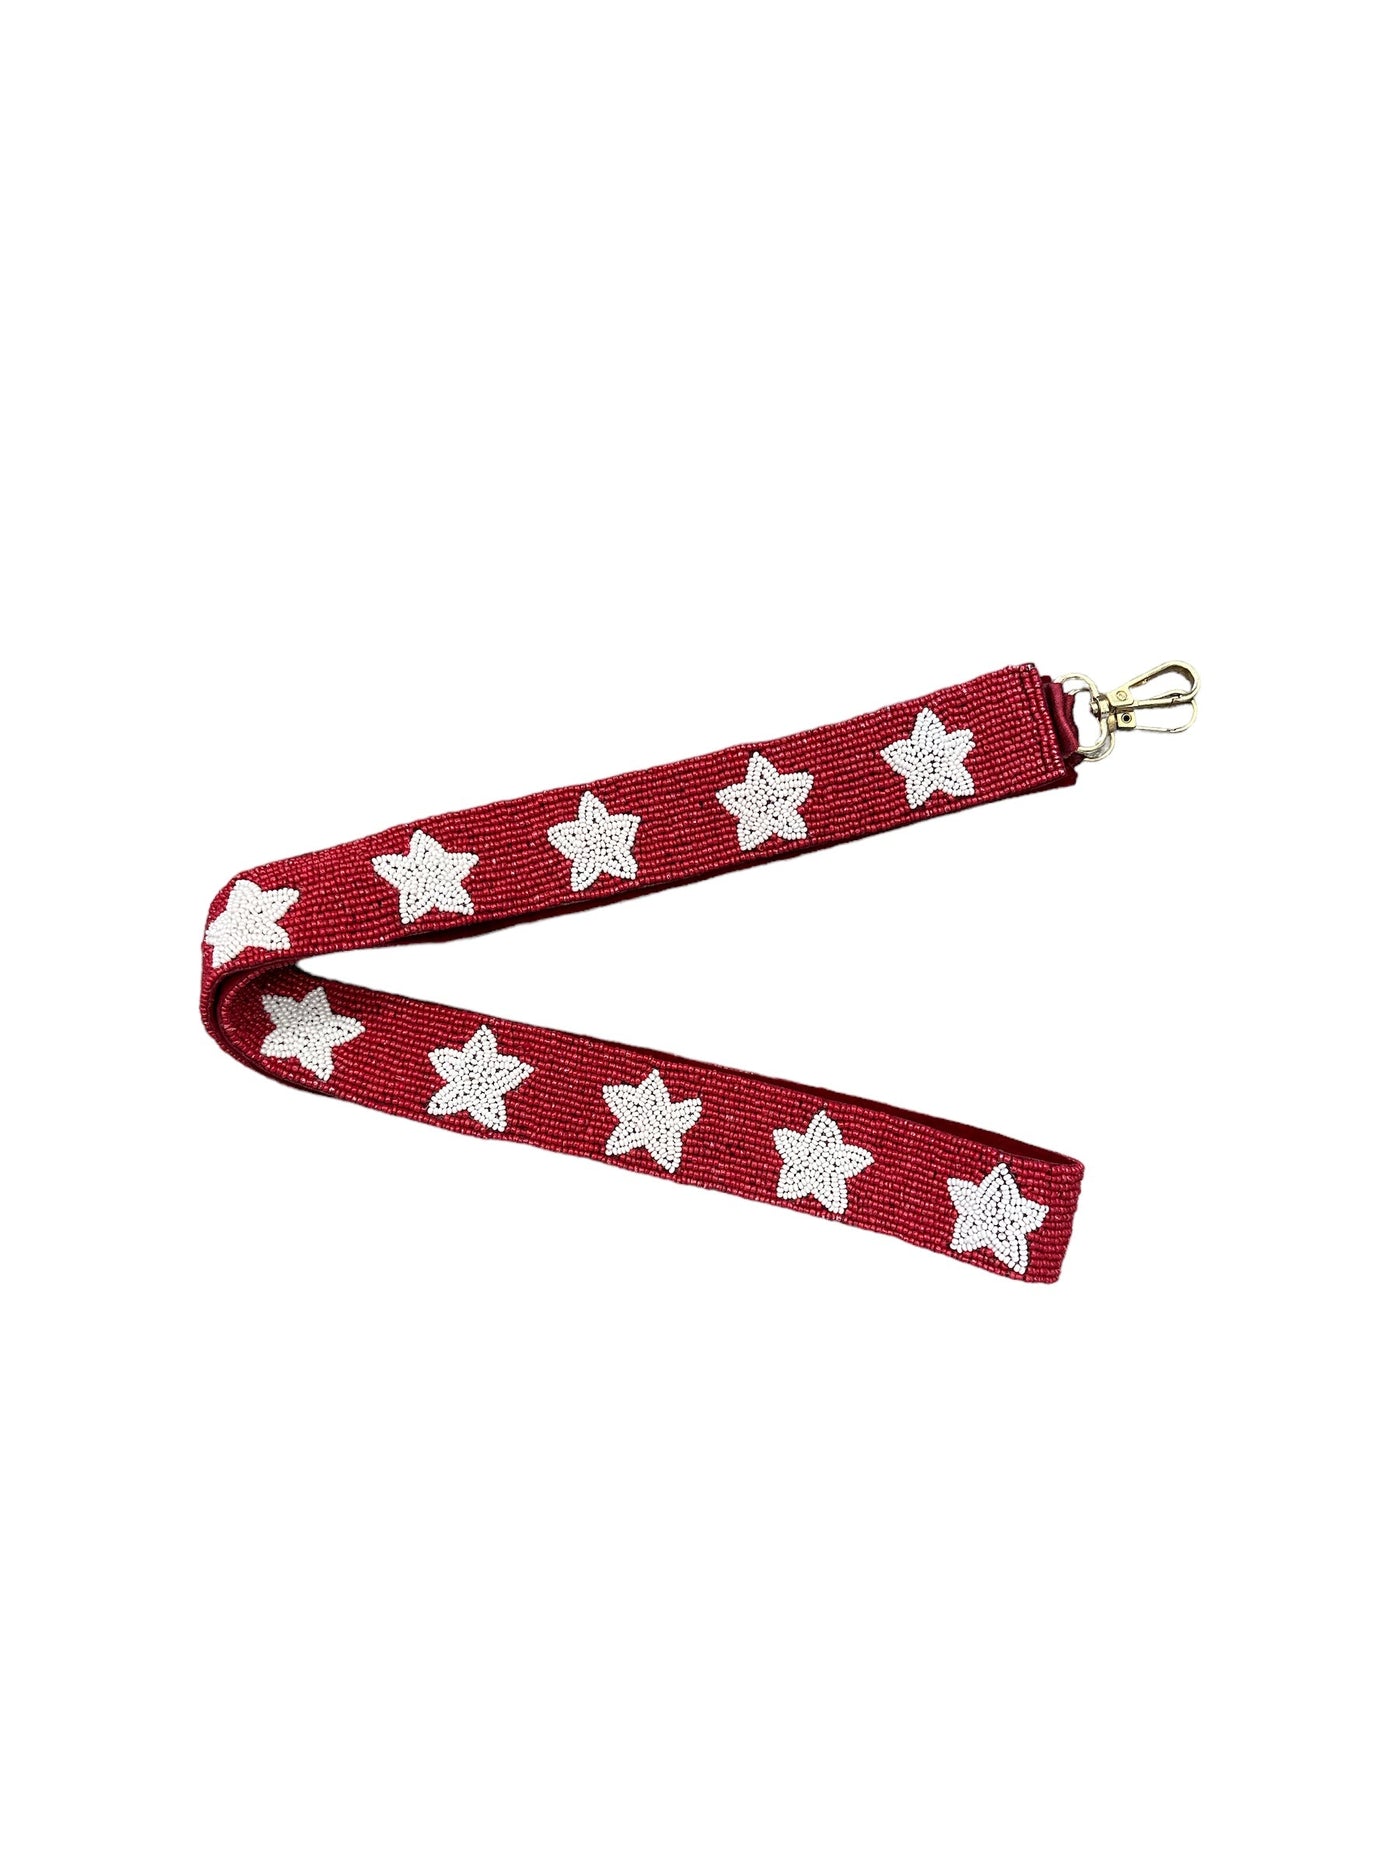 Seed Bead Bag Strap - Red with White Stars